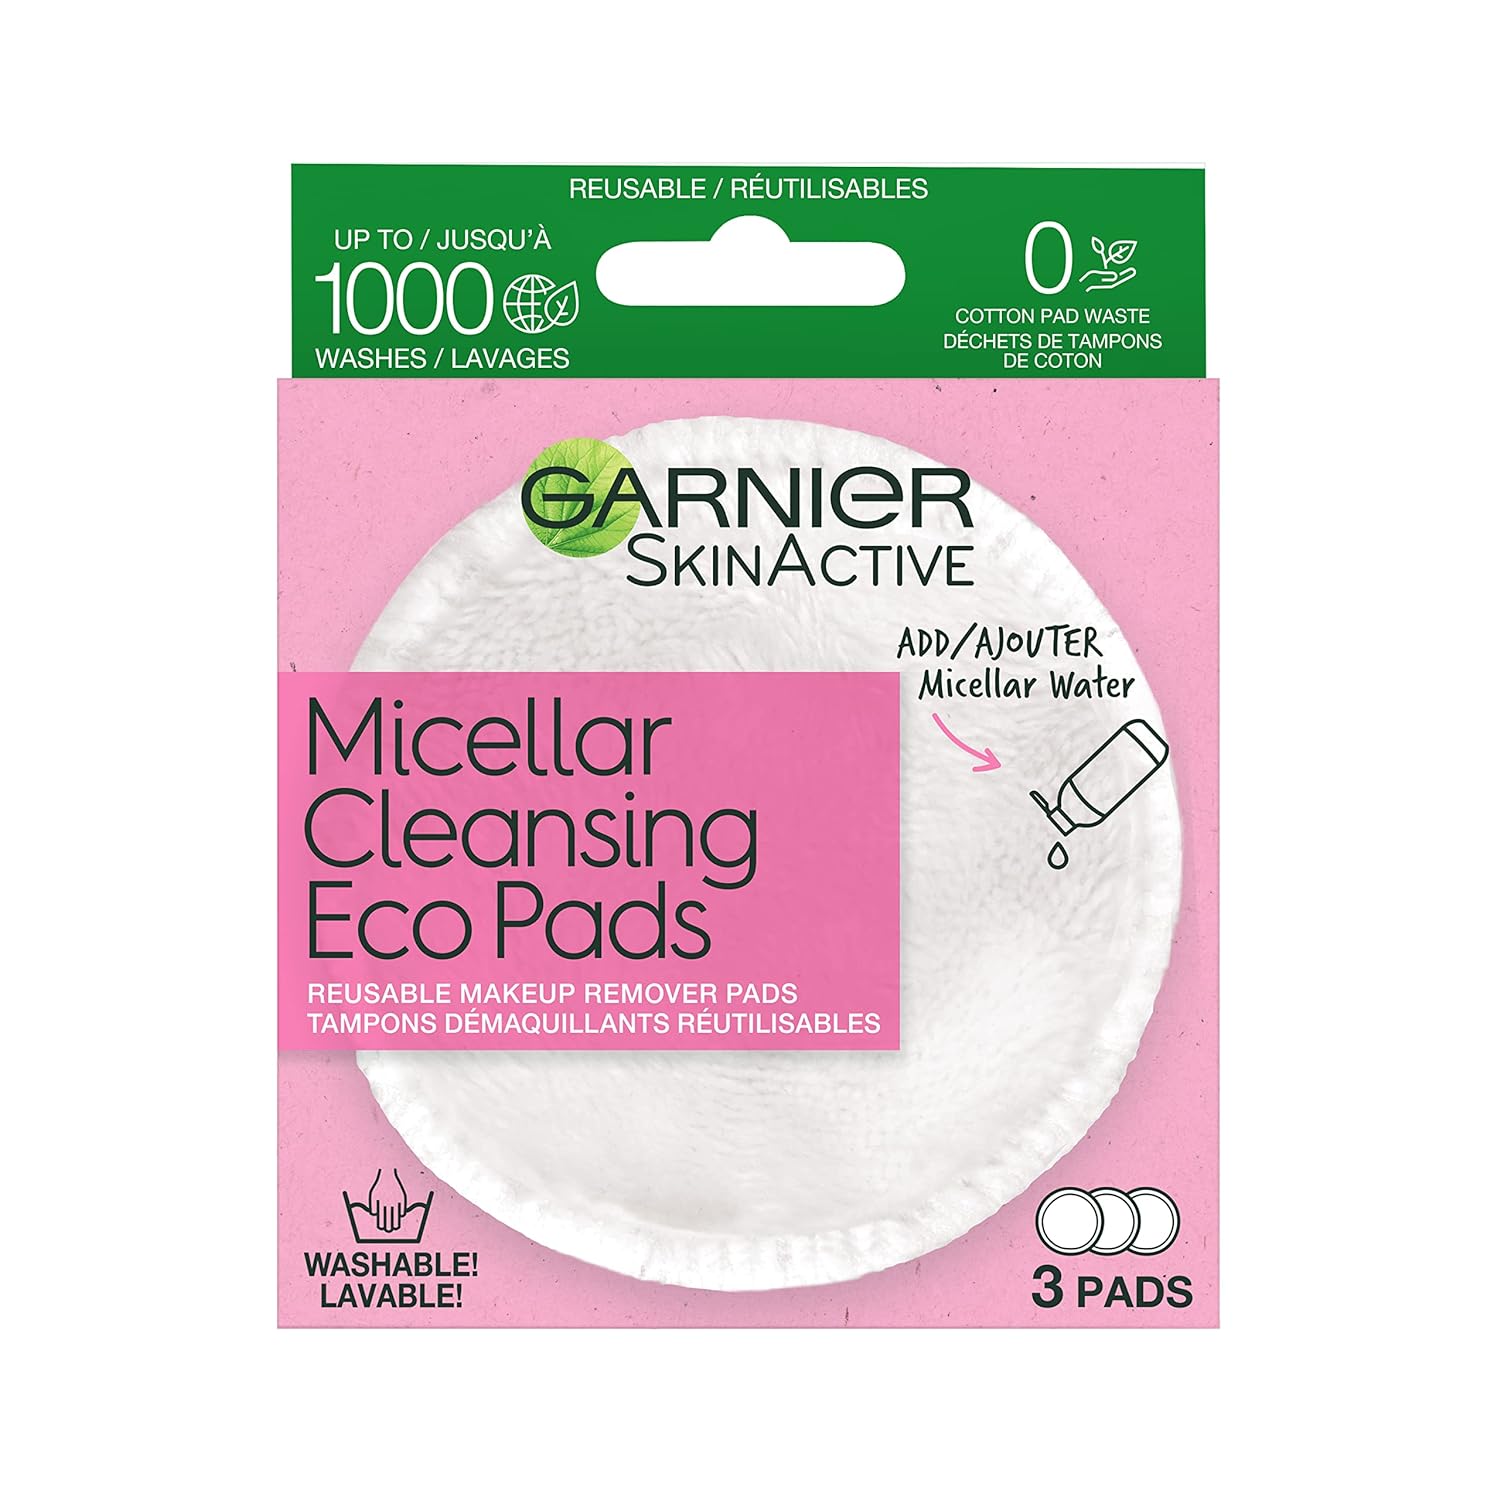 Garnier SkinActive Micellar Cleansing Eco Pads, Reusable, 3 Ultra-soft Microfiber Pads, 1 Count (Packaging May Vary) : Beauty & Personal Care